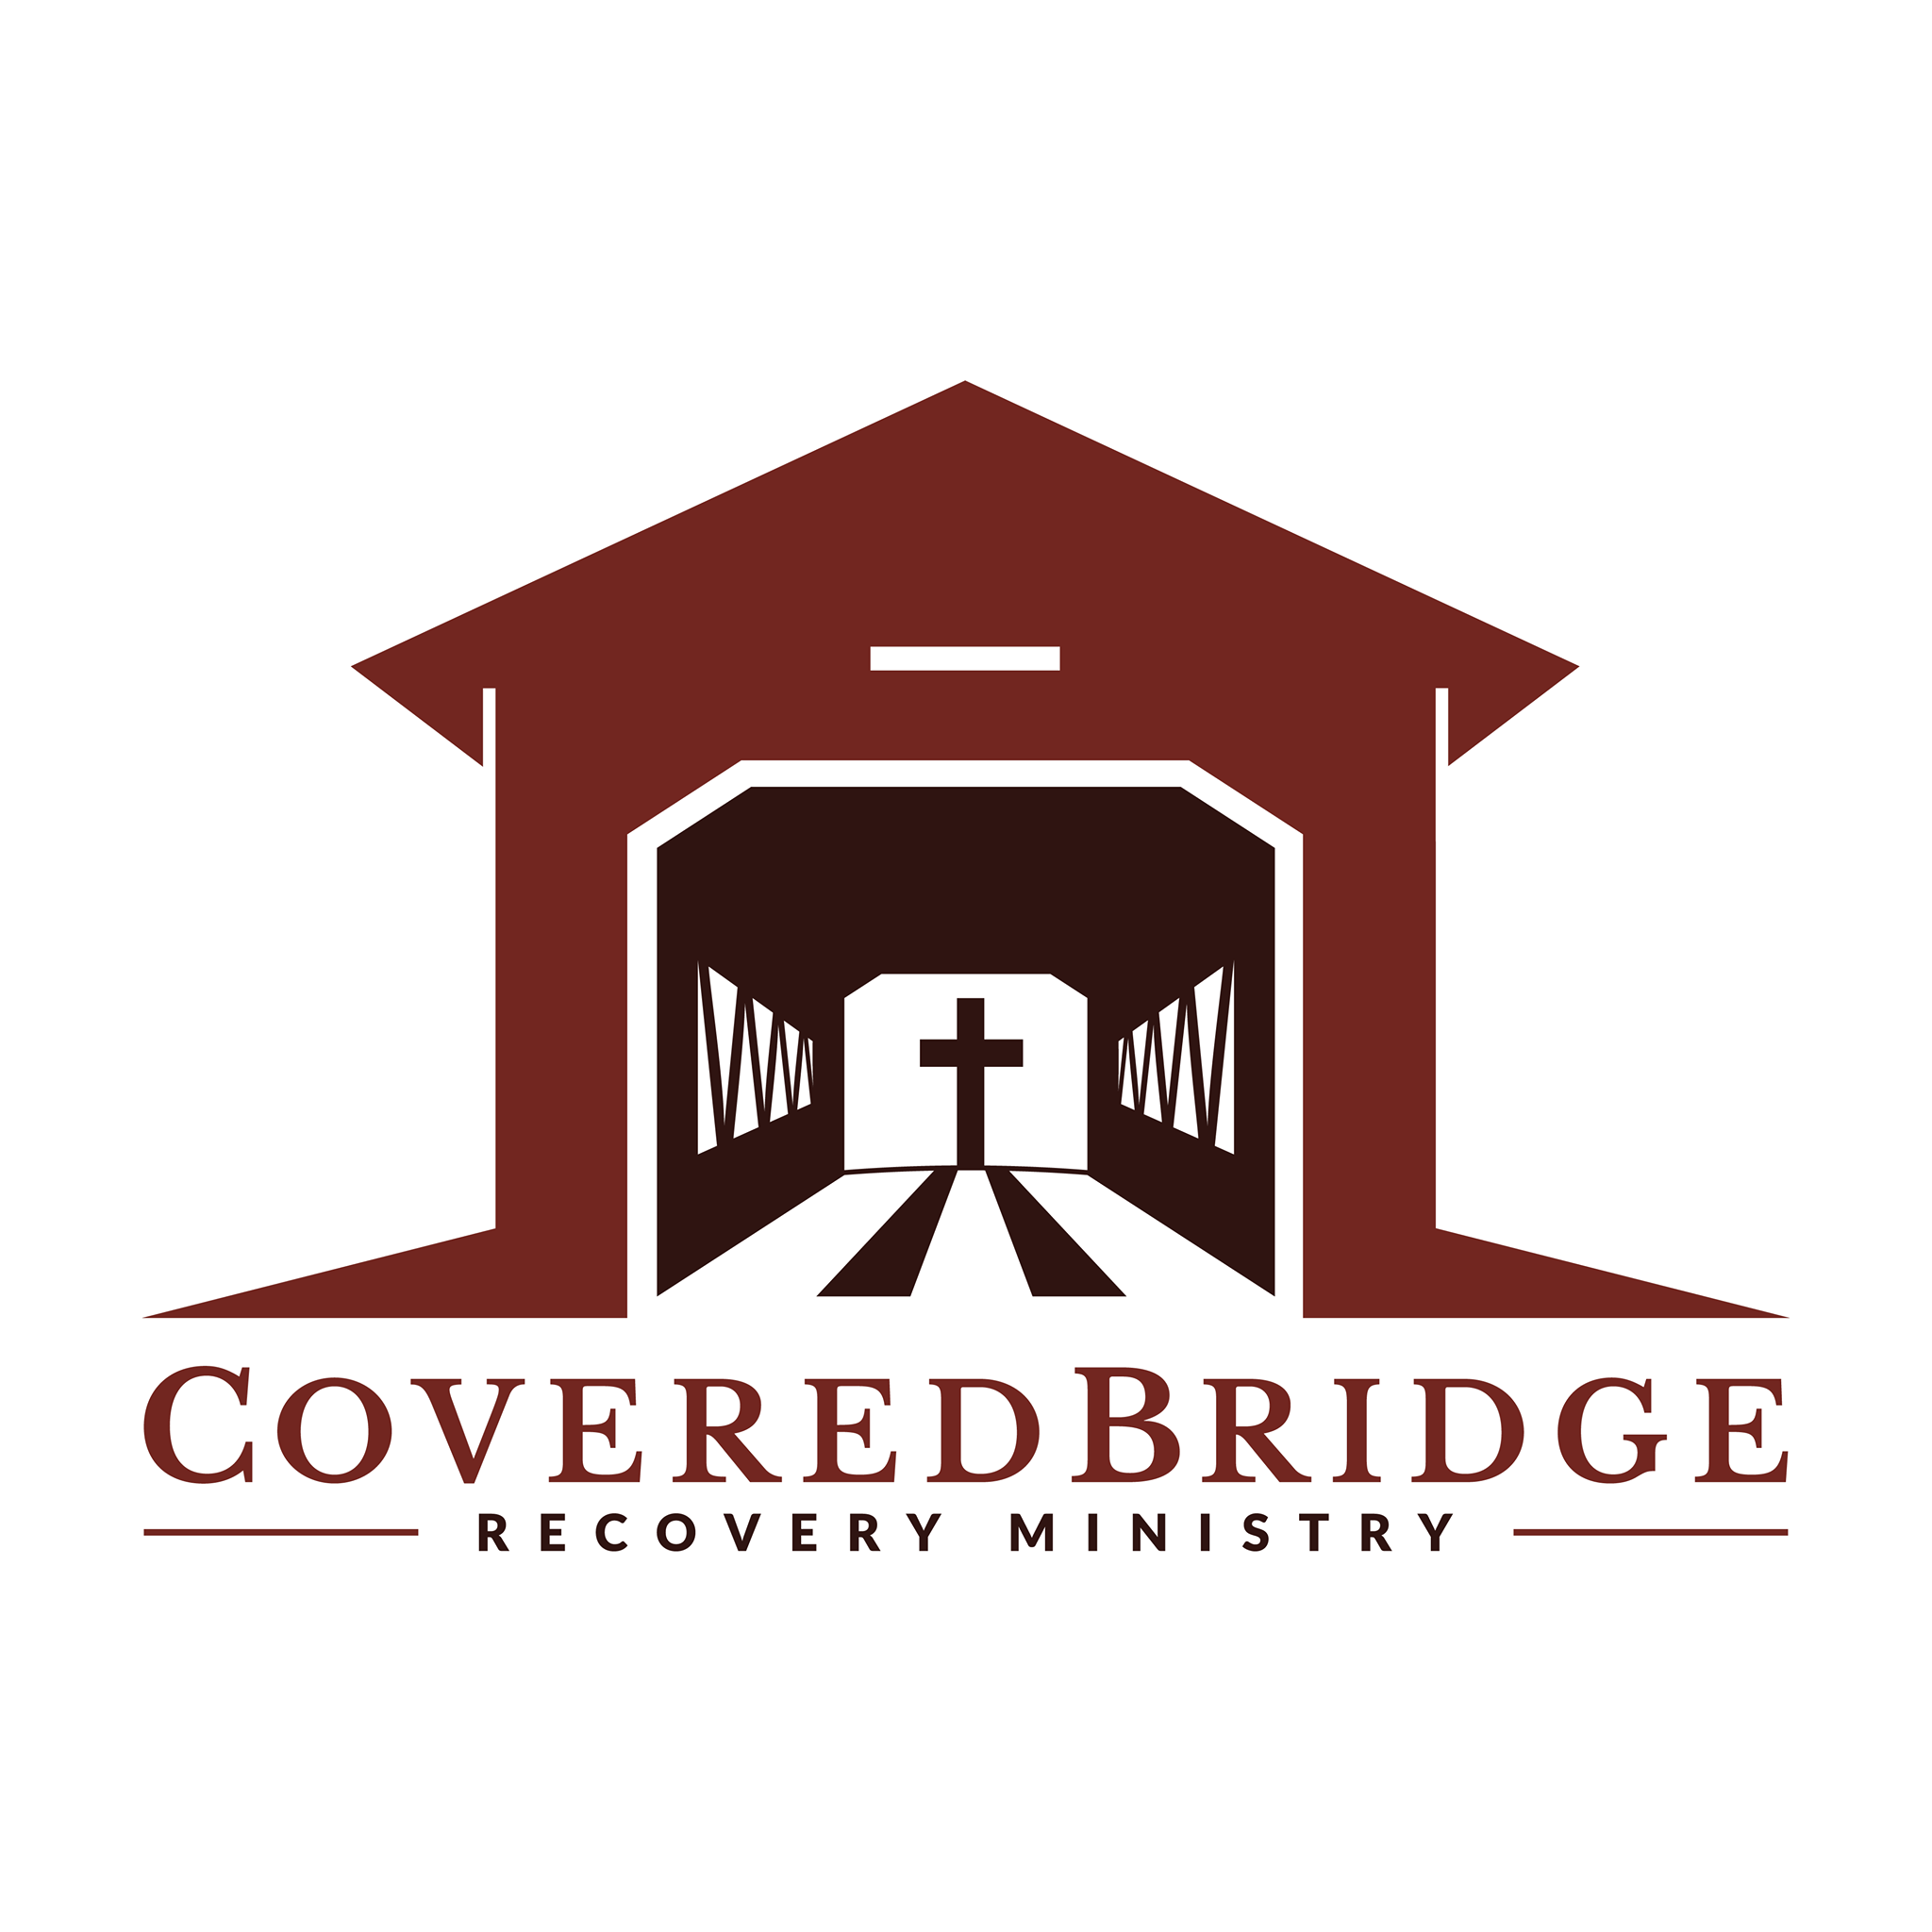 Covered Bridge Recovery Ministry